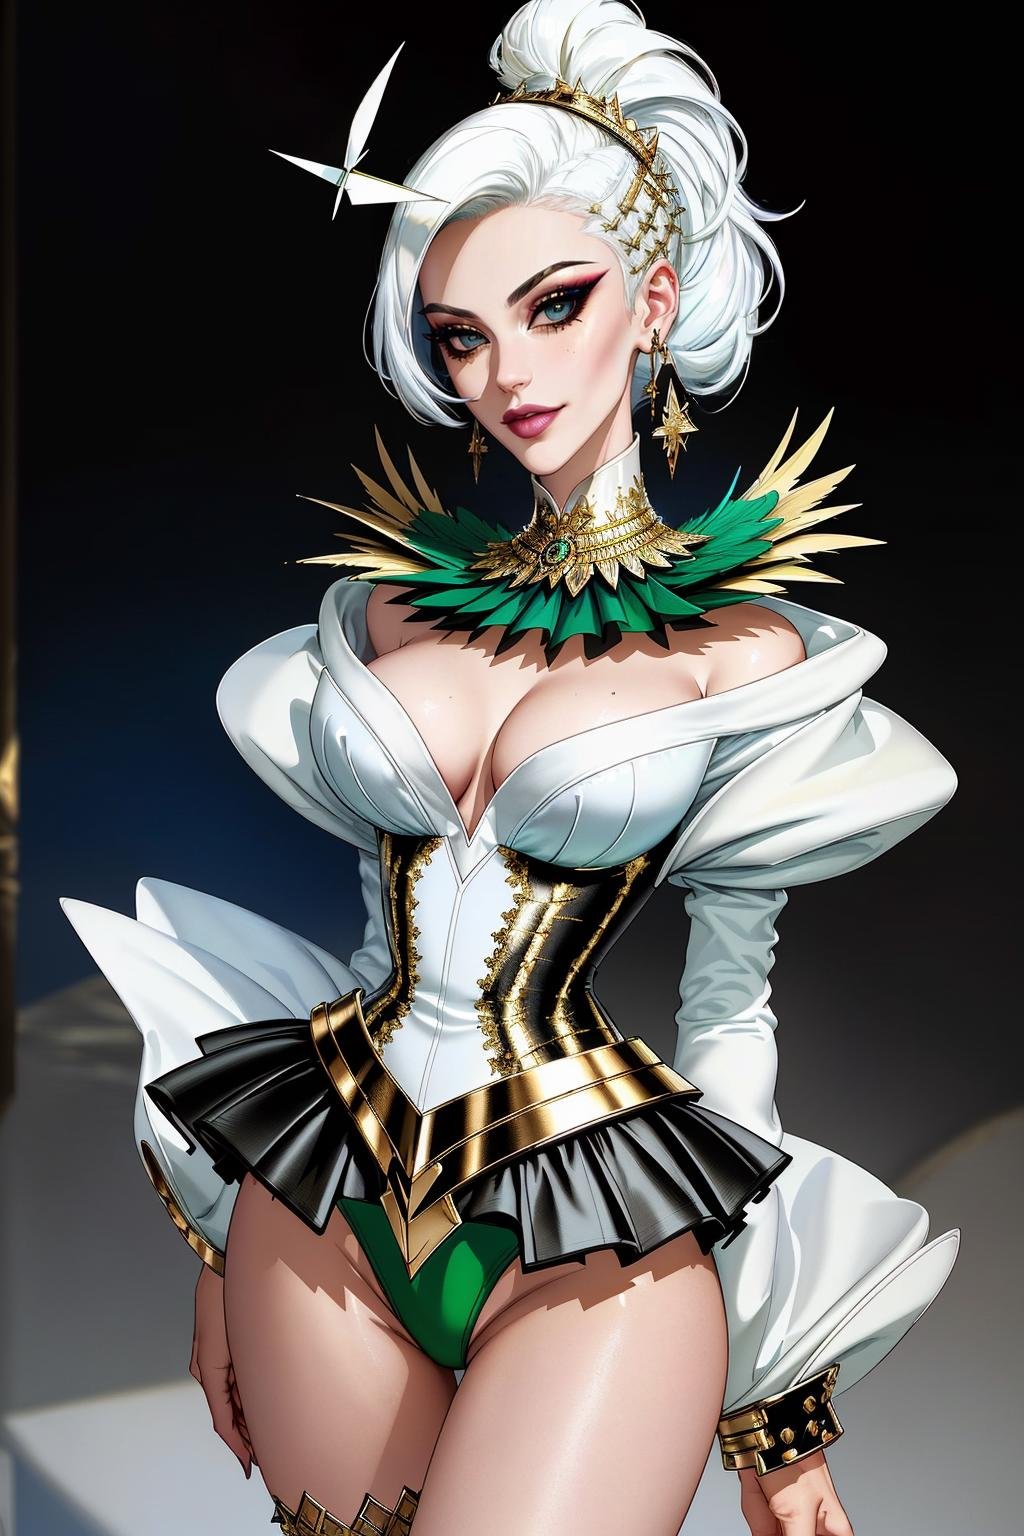 ((Masterpiece, best quality,edgQuality)),smirk,smug,white hair,Haute_Couture, green miniskirt,golden embroidery, woman wearing a Haute_Couture miniskirt, (((edgTM, wearing edgTM_style fashion, eccentric clothing))),feathers, <lora:edgLycorisMugler-light:1>